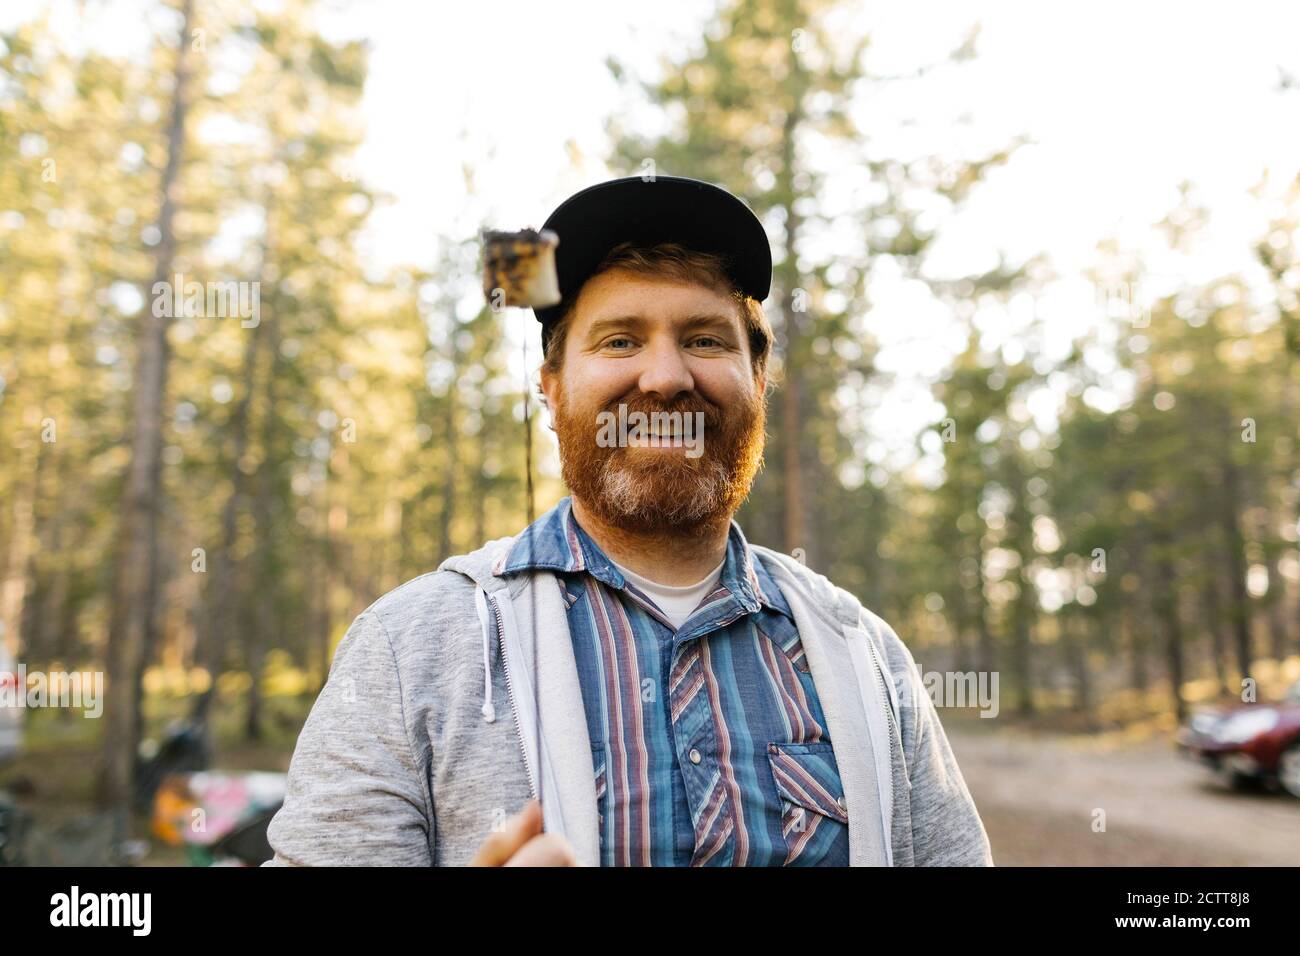 Portrait of smiling man holding roasted marshmallow on stick, Wasatch Cache National Forest Stock Photo